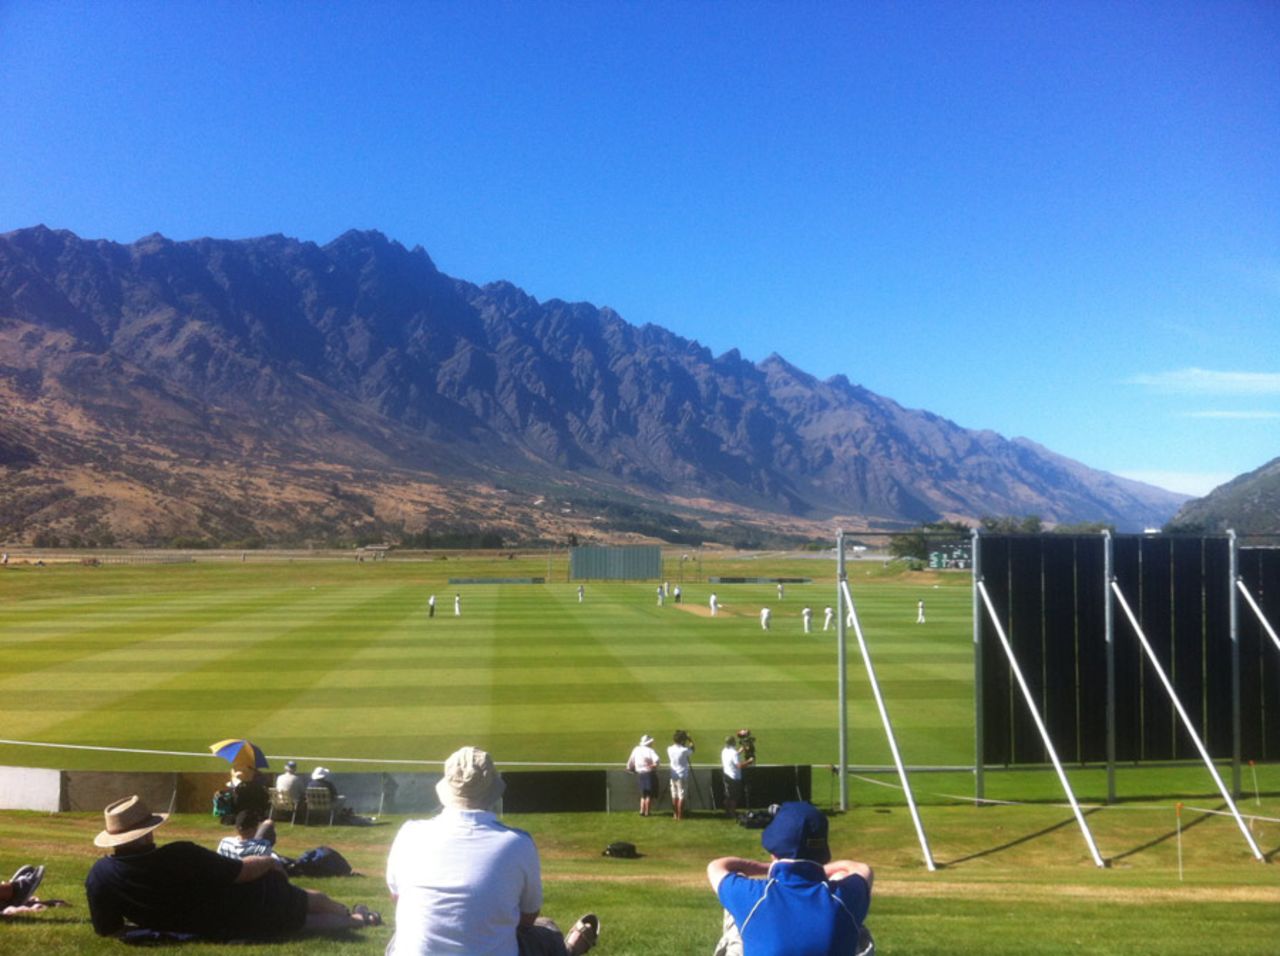 The Remarkables mountain range in the background of the Queenstown ground, New Zealand XI v England XI, Tour match, Queenstown, 1st day, February 27, 2013